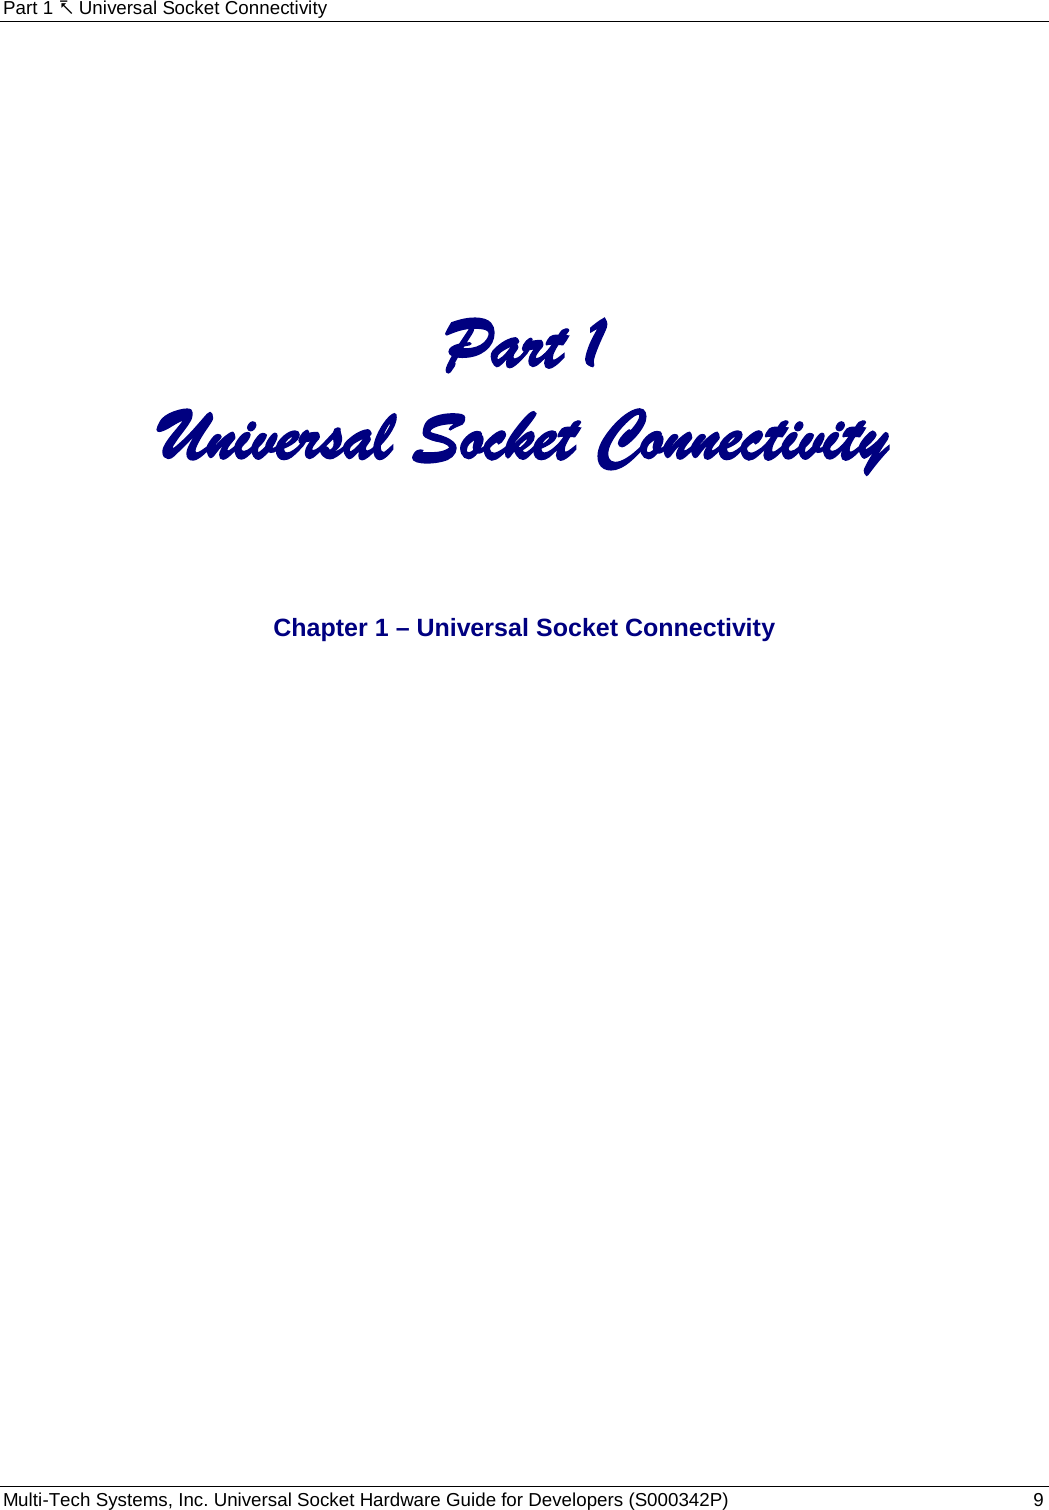 Part 1  Universal Socket Connectivity Multi-Tech Systems, Inc. Universal Socket Hardware Guide for Developers (S000342P)  9           Part 1 Universal Socket Connectivity     Chapter 1 – Universal Socket Connectivity   